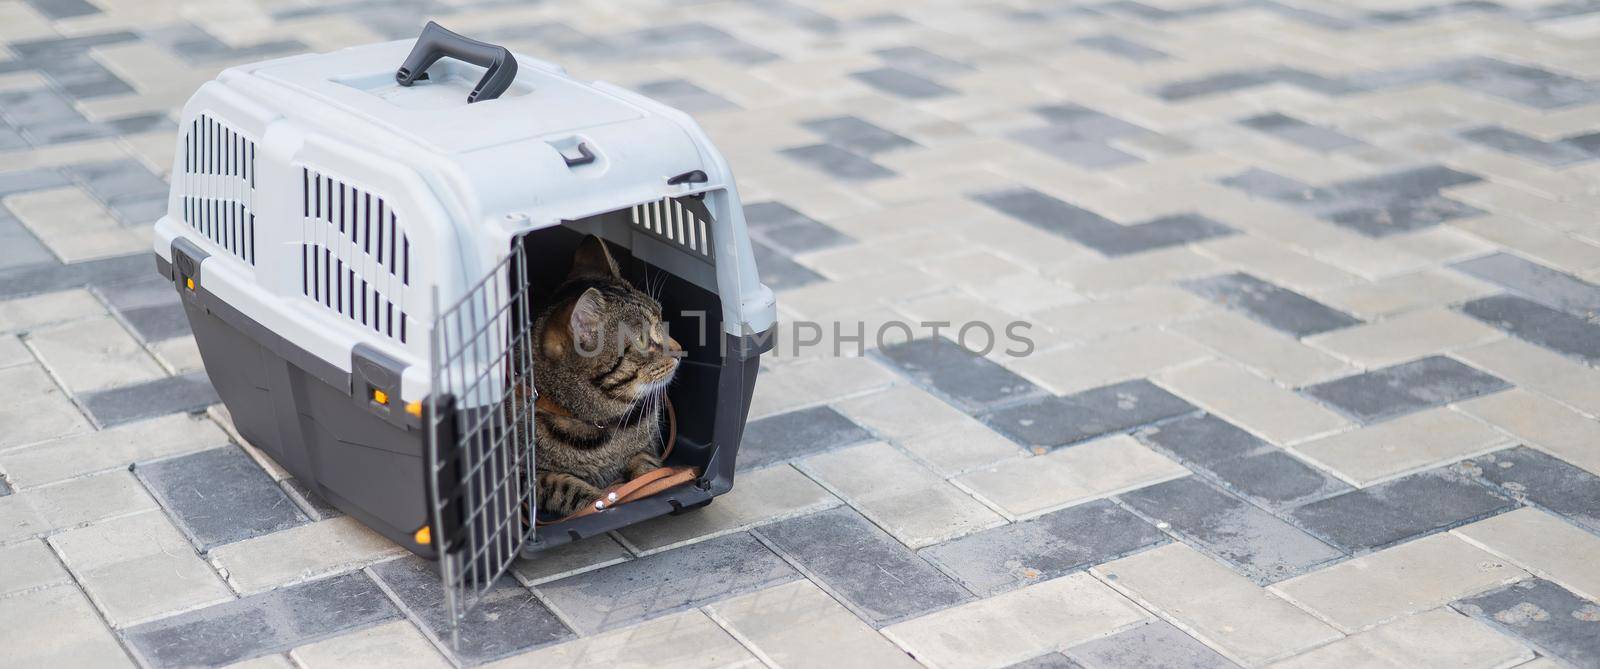 Gray tabby cat lies in a carrier on the sidewalk outdoors. by mrwed54